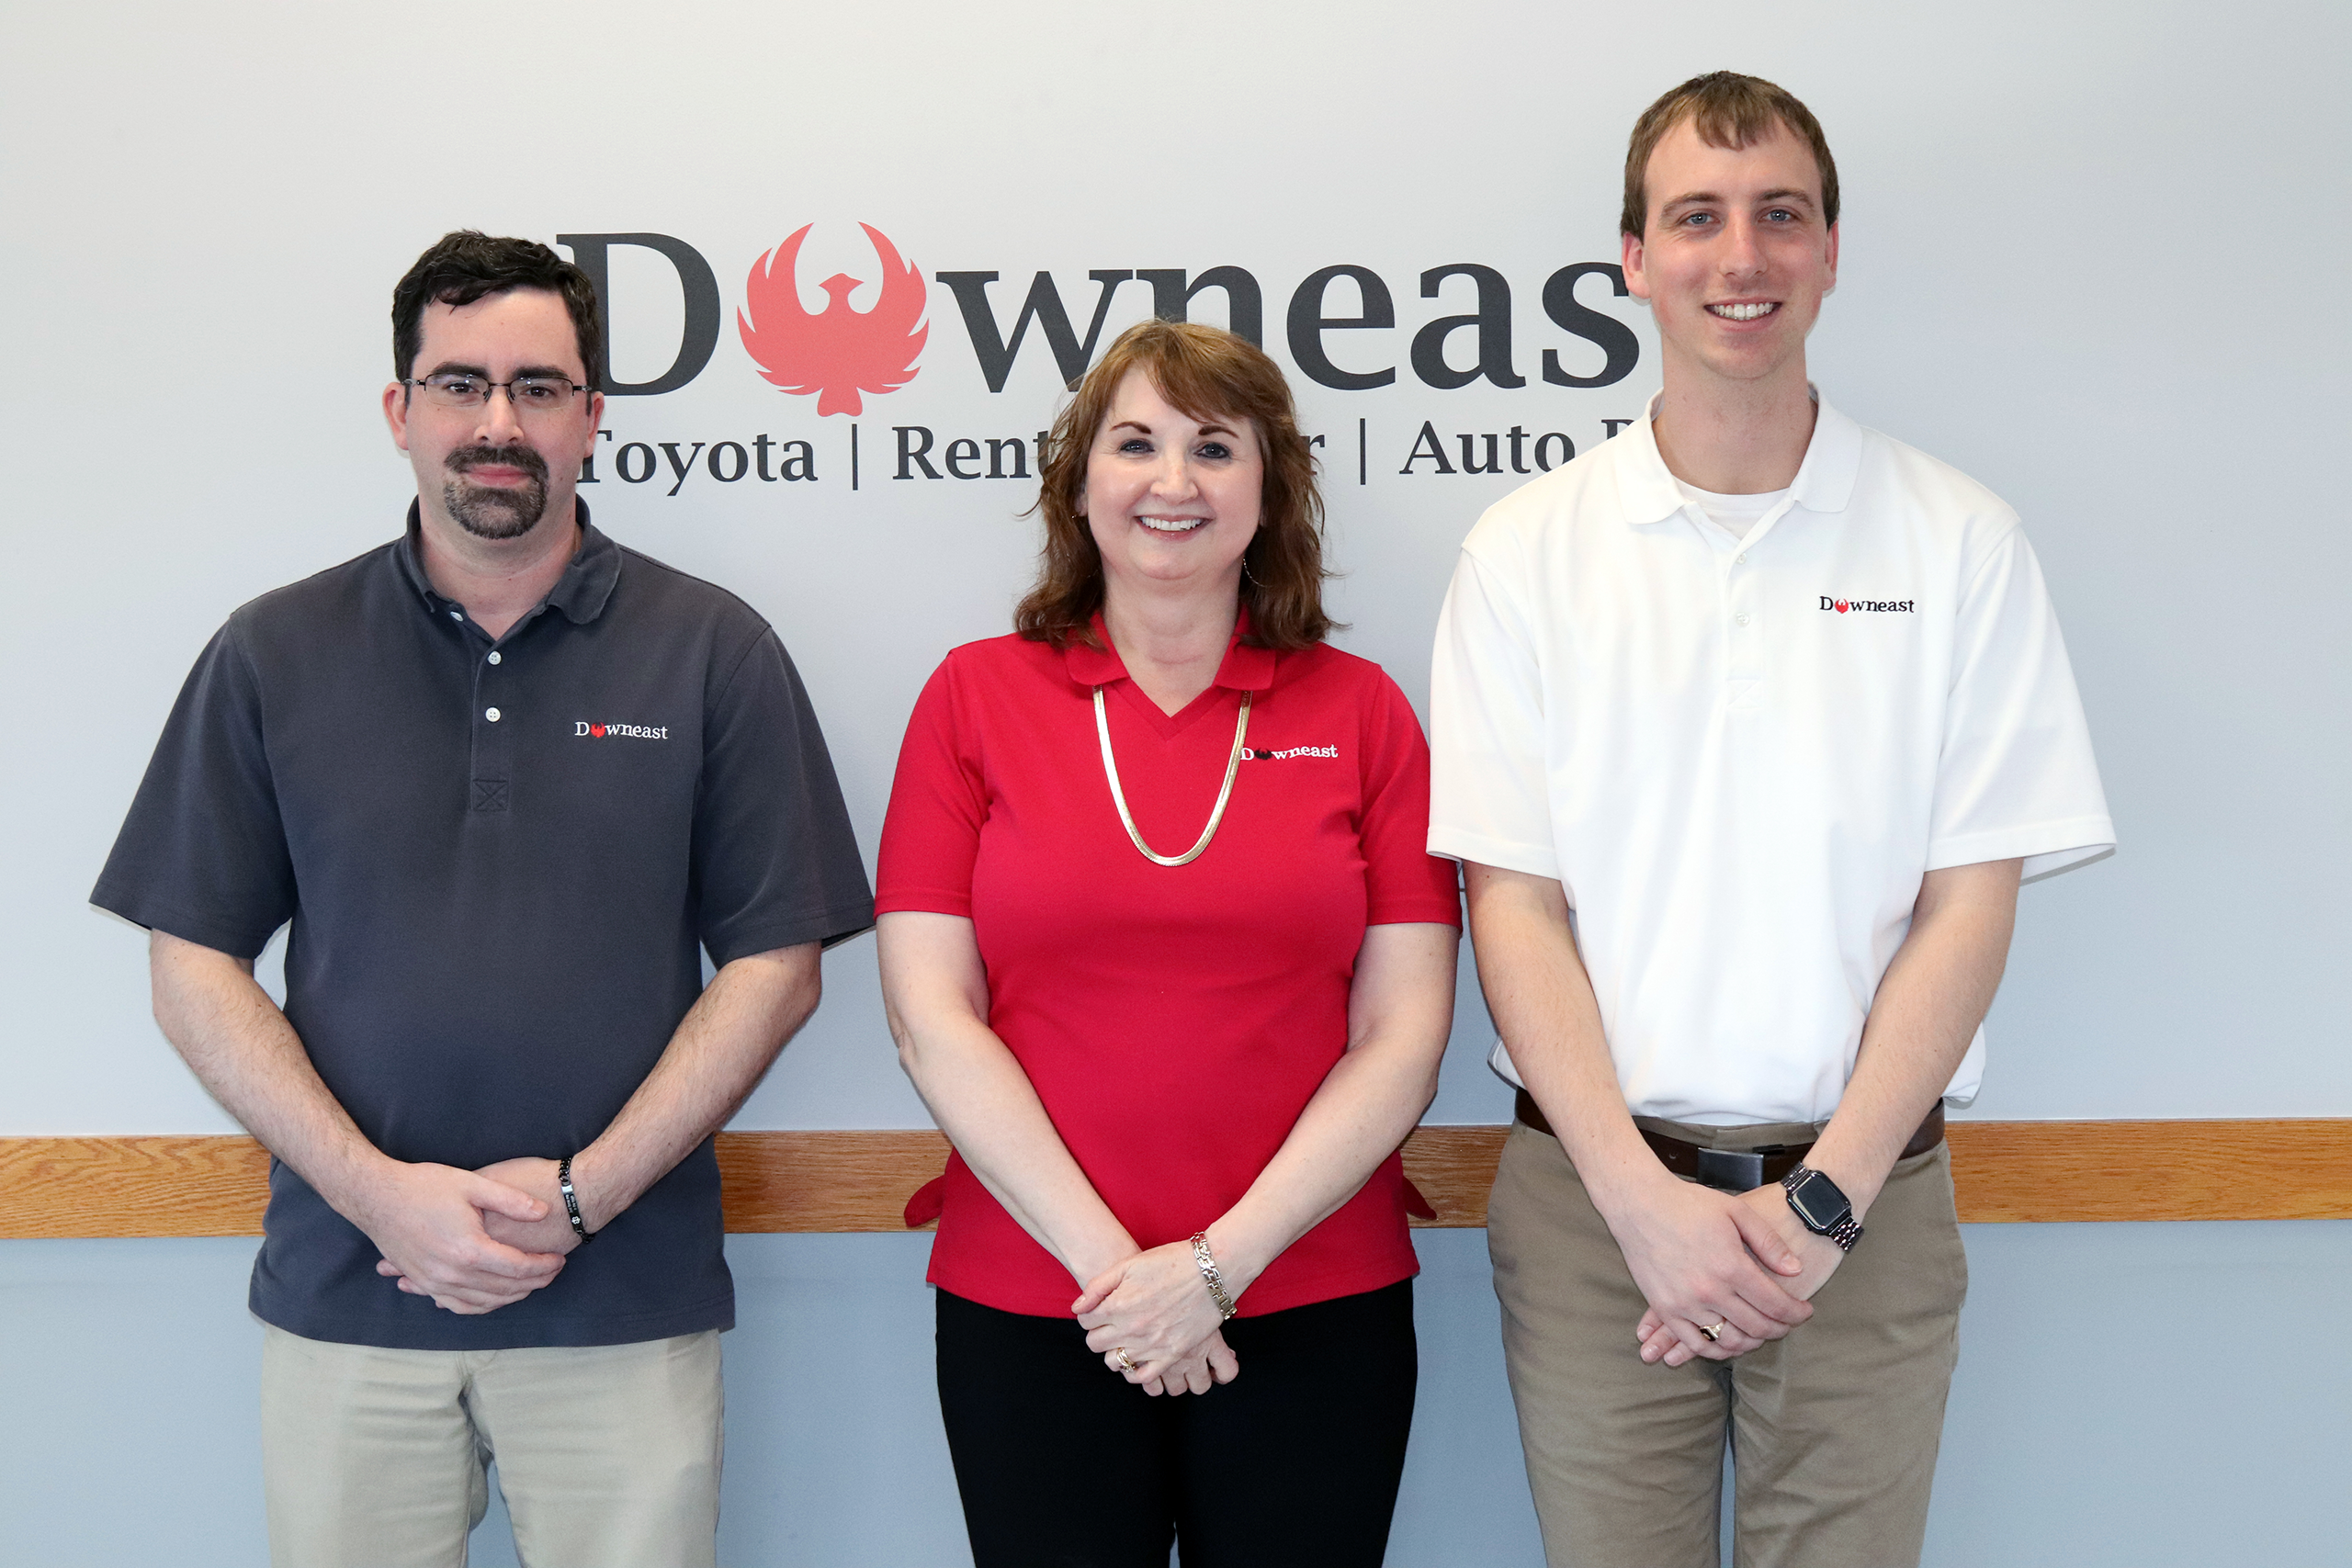 Why Downeast Toyota